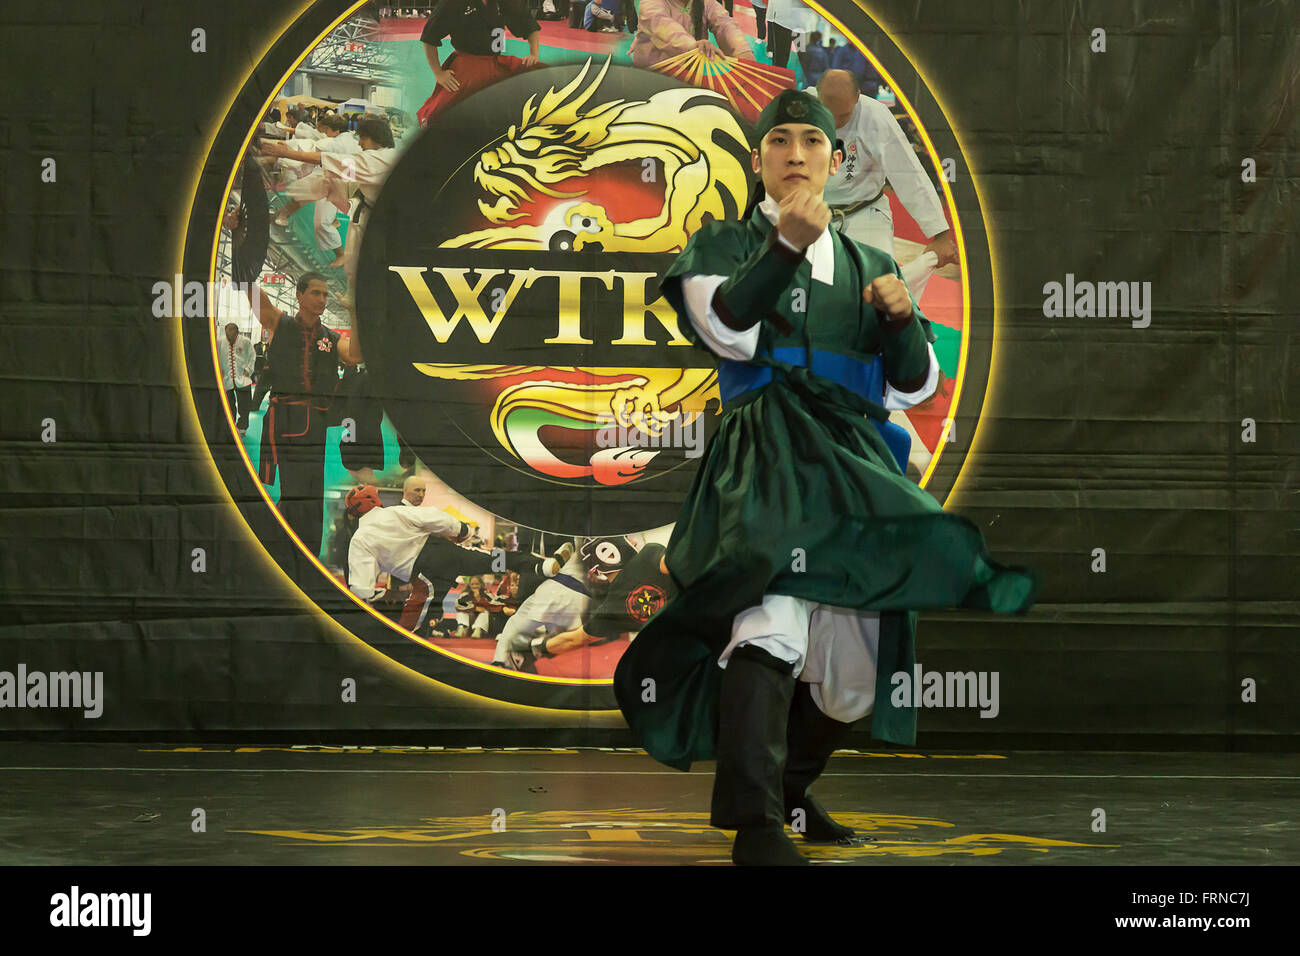 Sippalki Martial Art of Korea at the Budo Festival in Turin,Italy,managed by the WTKA, World Traditional Karaté Association Stock Photo